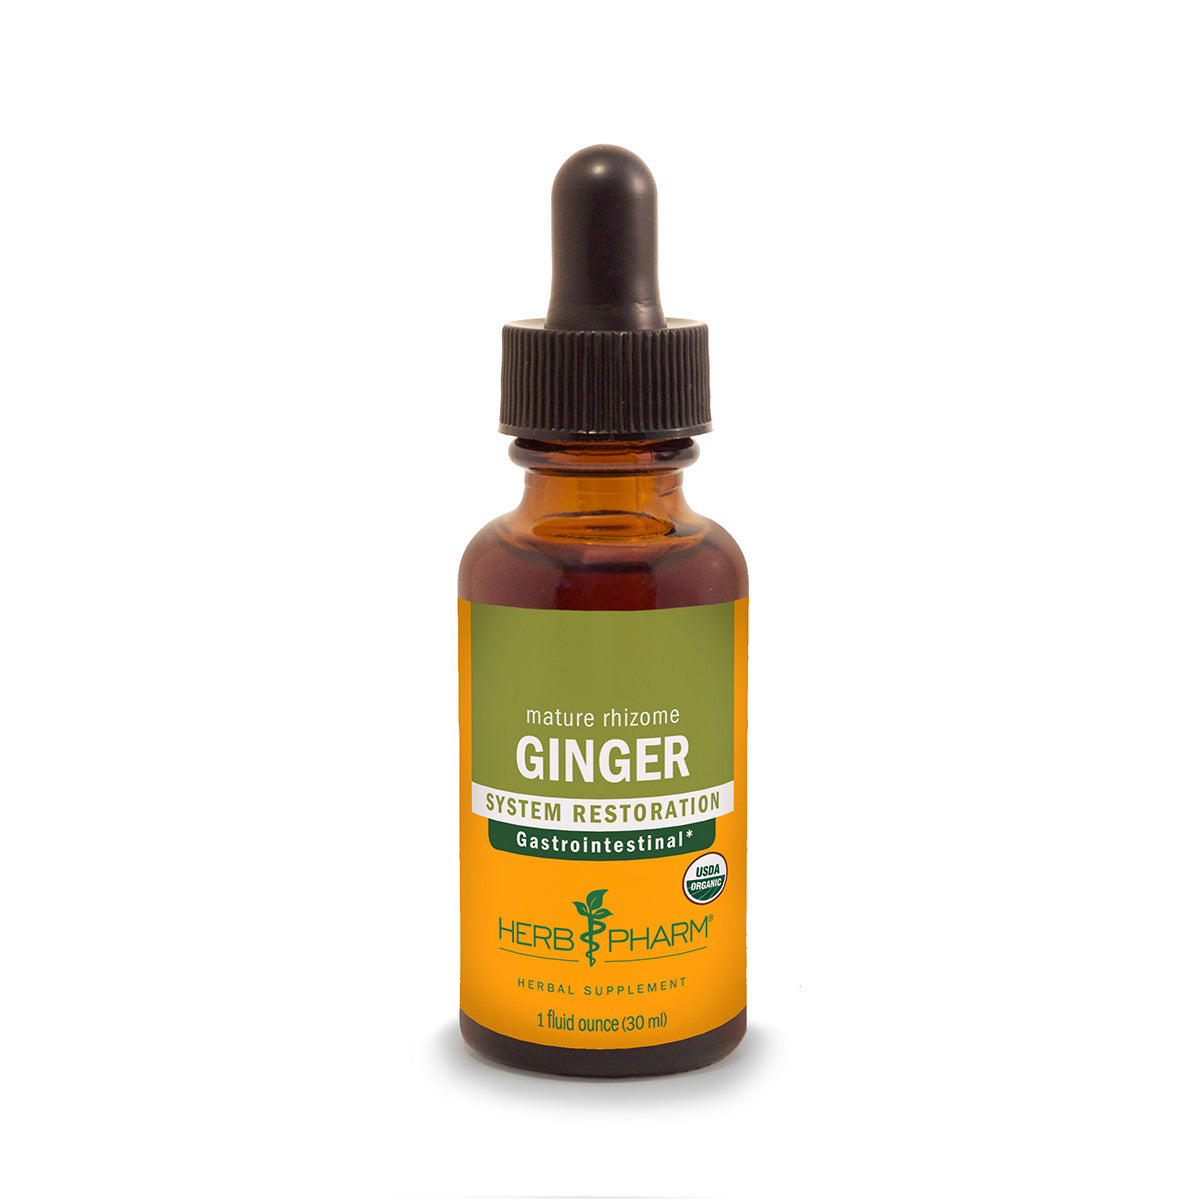 Primary image of Ginger Extract